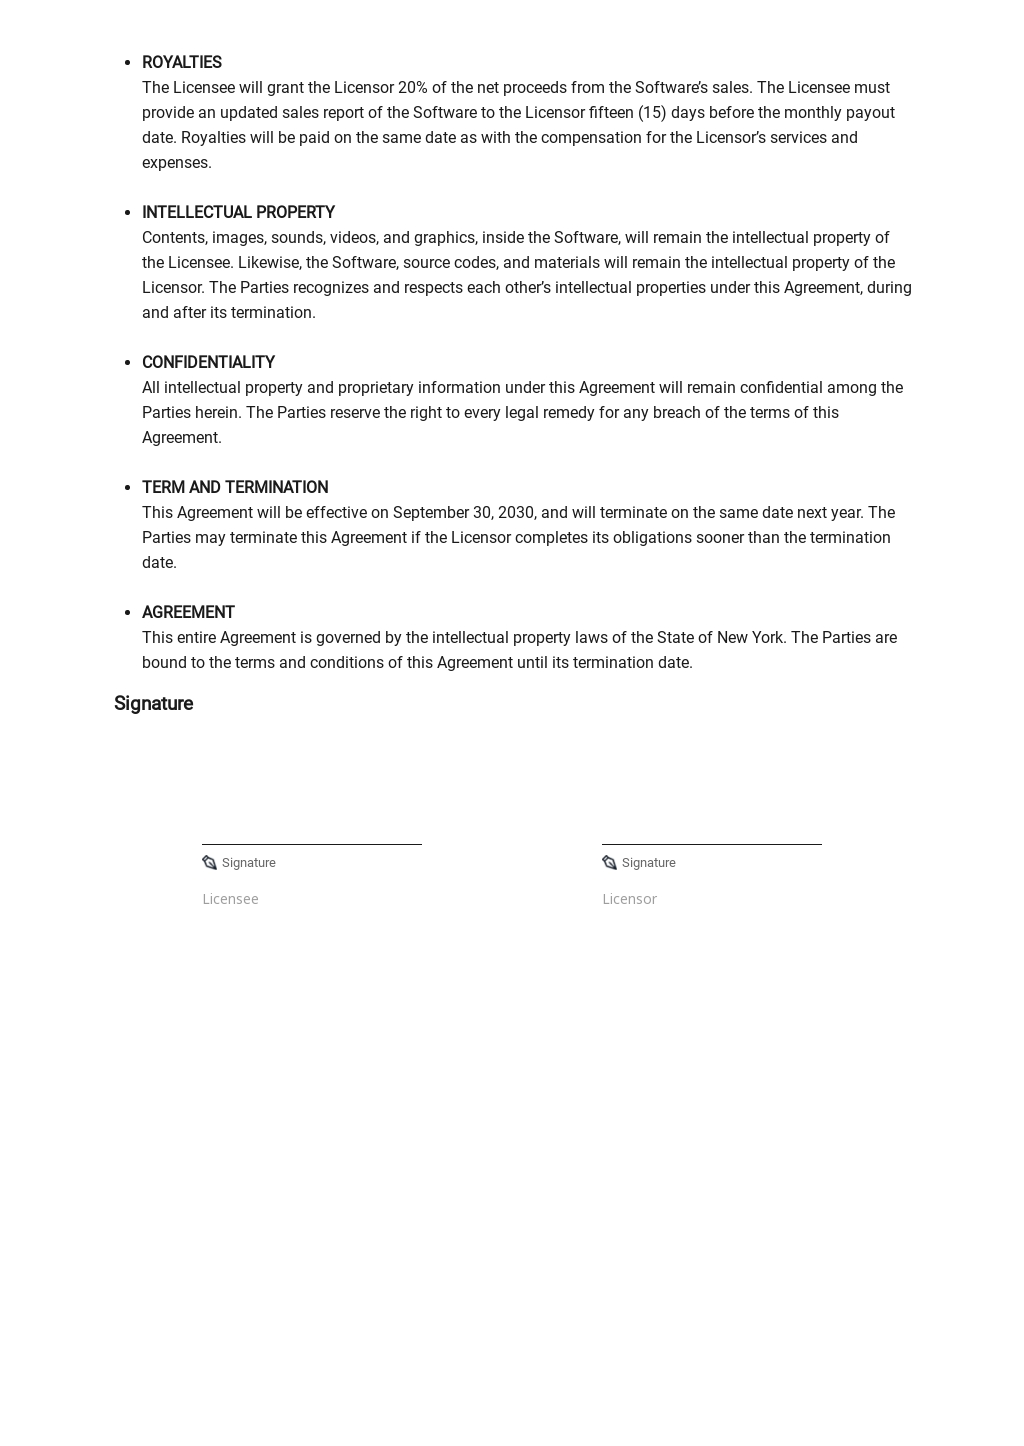 Multimedia Development and License Agreement Template - Google Inside net 30 terms agreement template